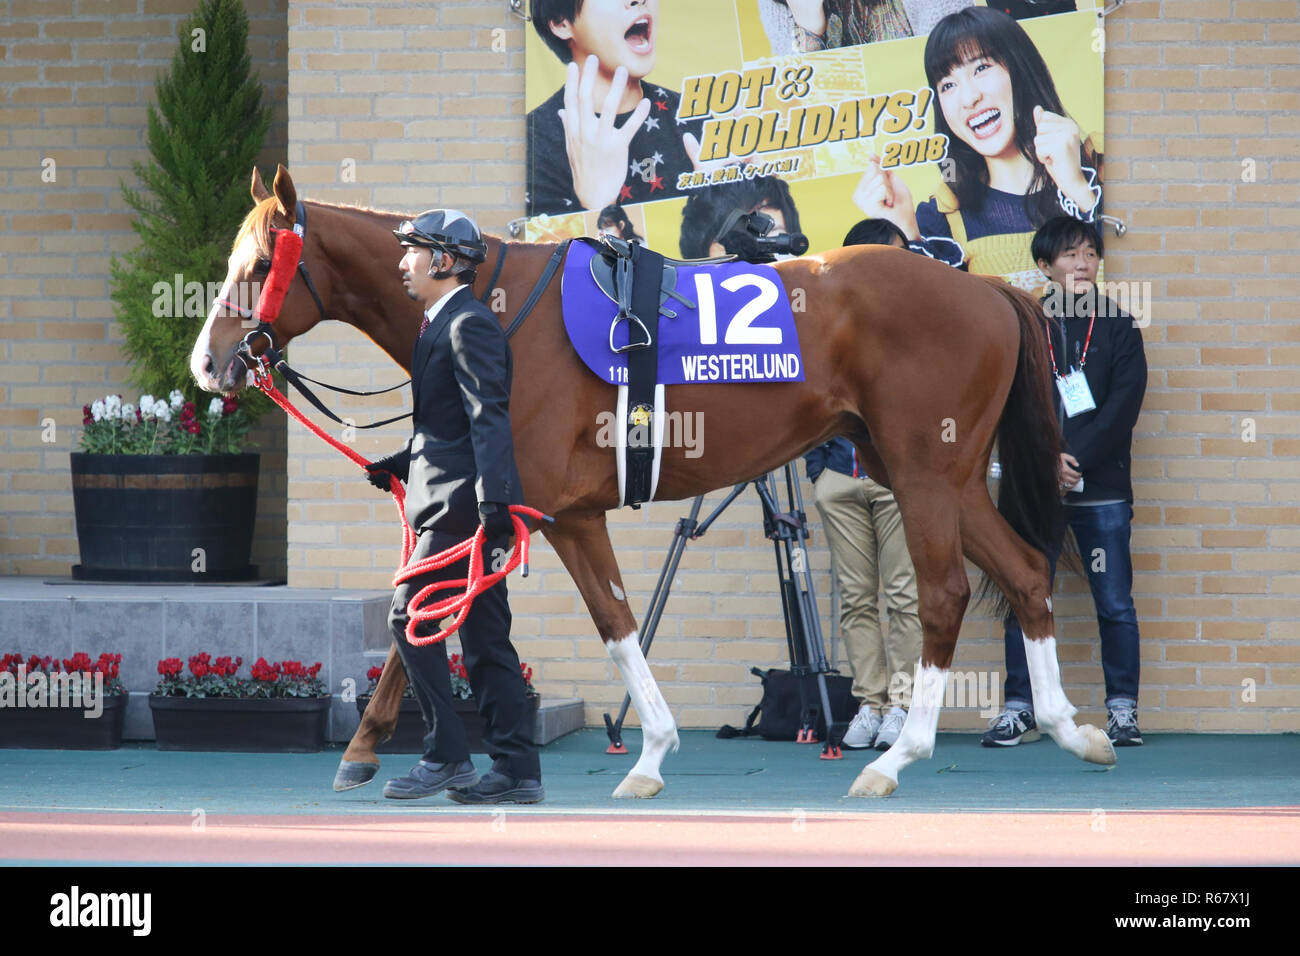 Aichi, Japan. 2nd Dec, 2018. Westerlund Horse Racing : Westerlund is led through the paddock before the Champions Cup at Chukyo Racecourse in Aichi, Japan . Credit: Eiichi Yamane/AFLO/Alamy Live News Stock Photo